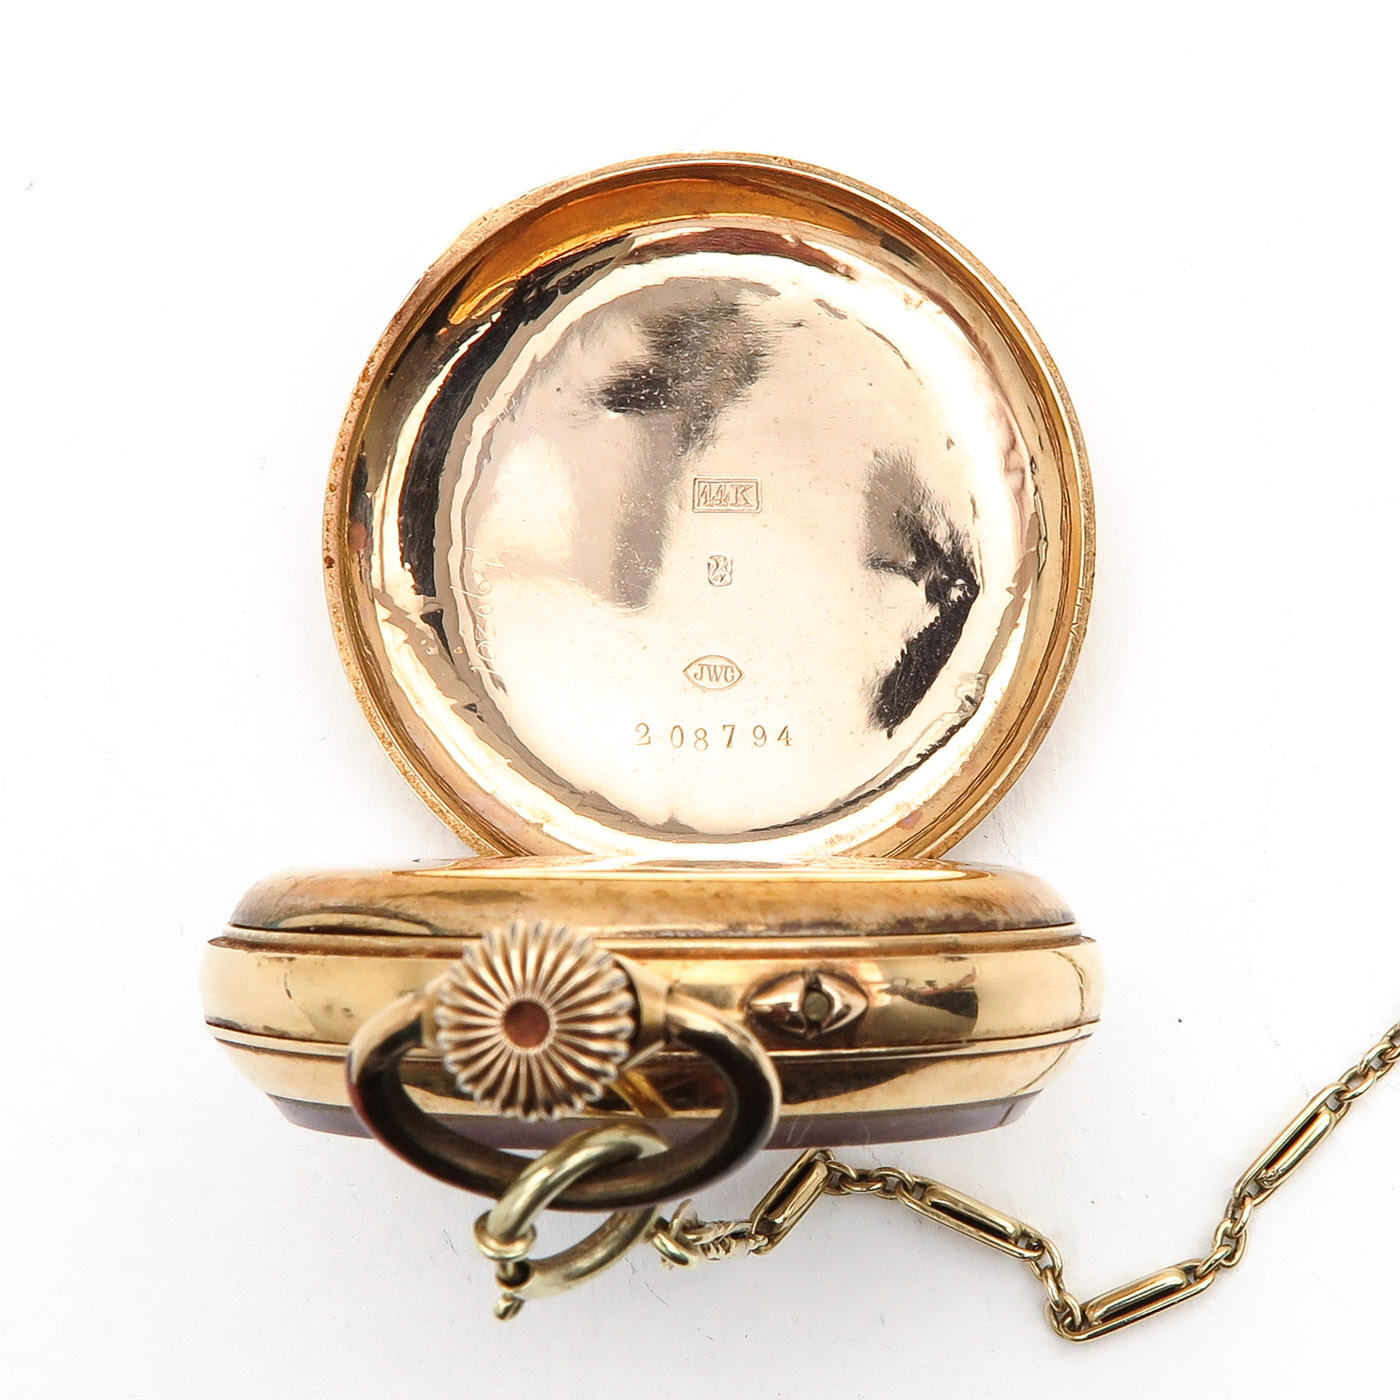 An IWC Pocket Watch - Image 5 of 6